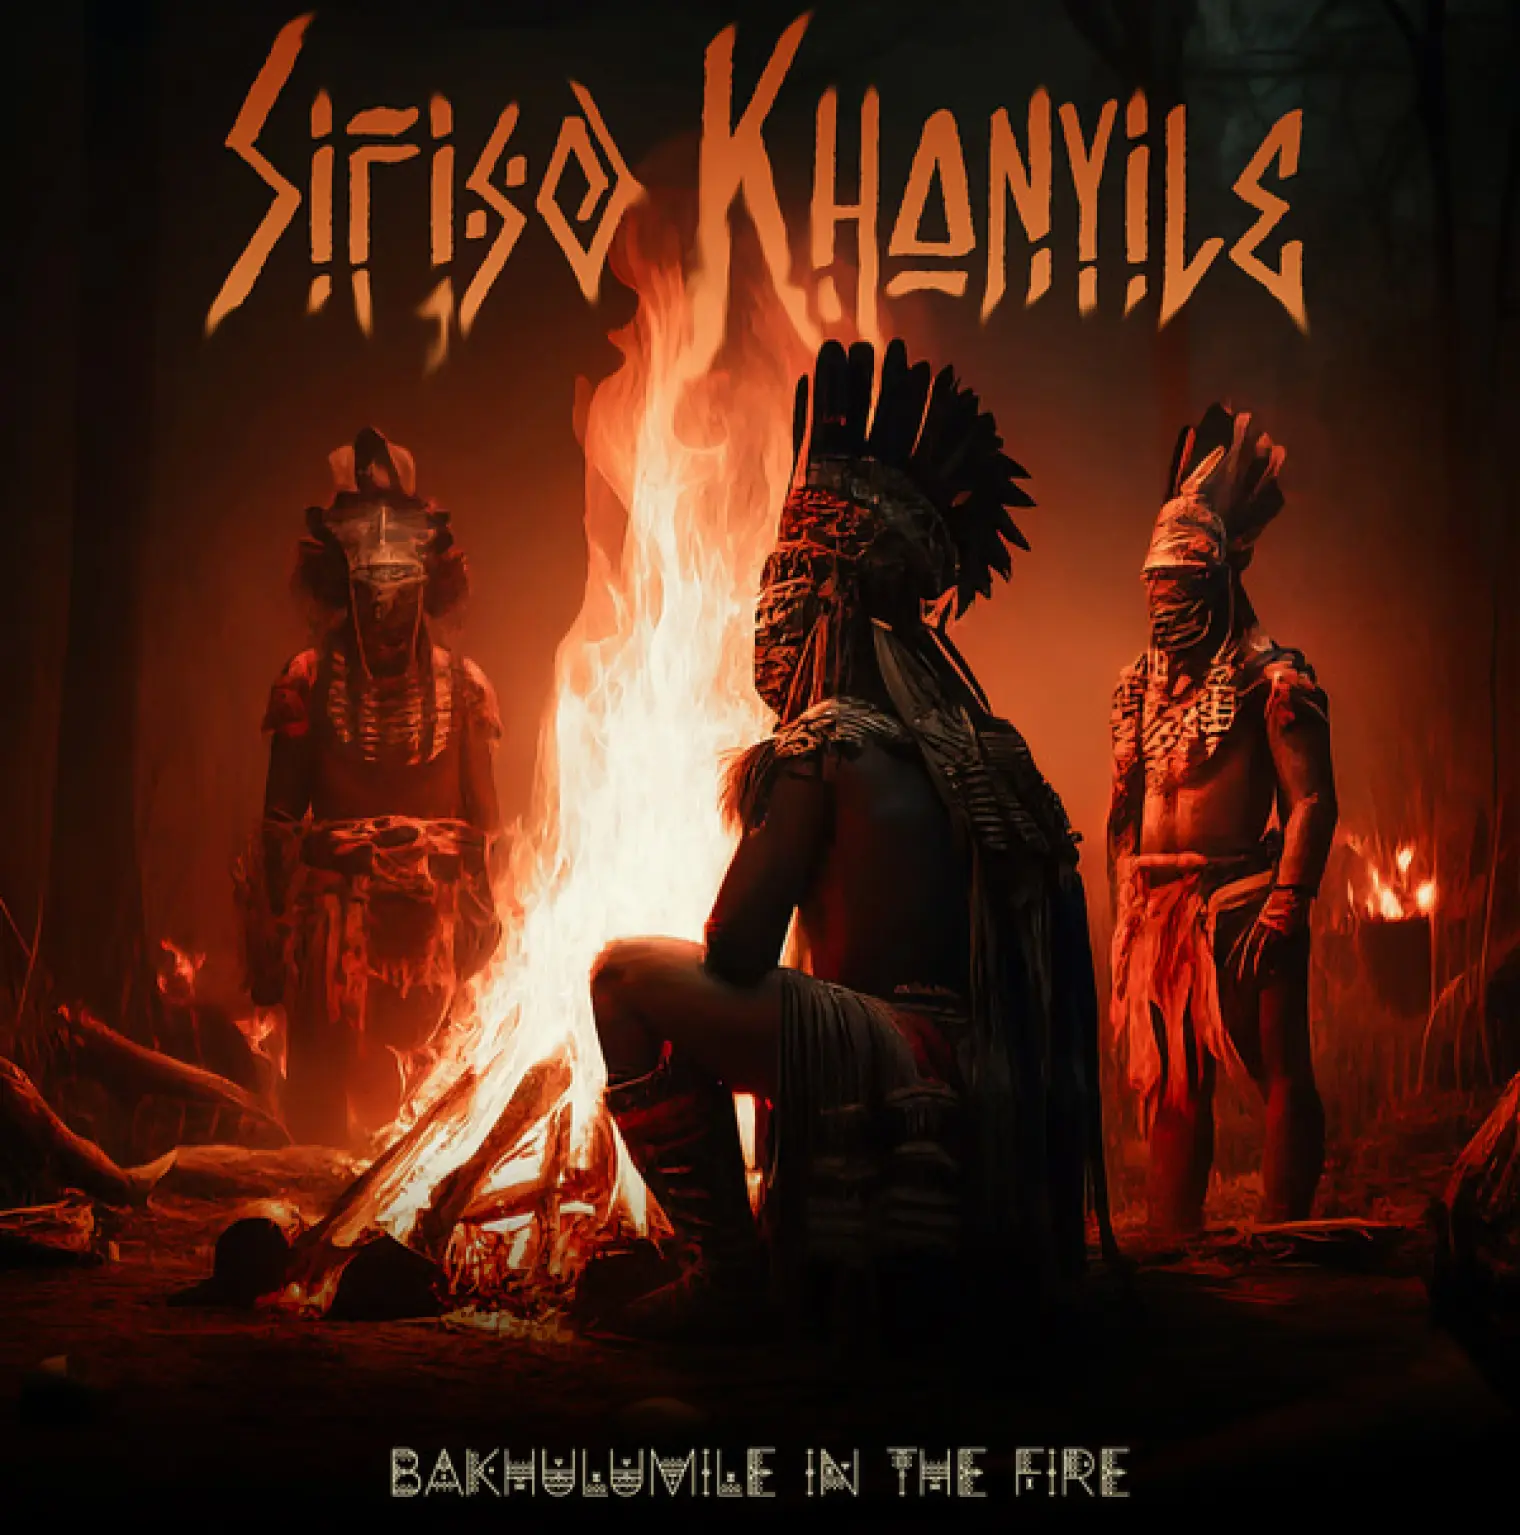 Bakhulumile in the Fire -  Sifiso Khanyile 